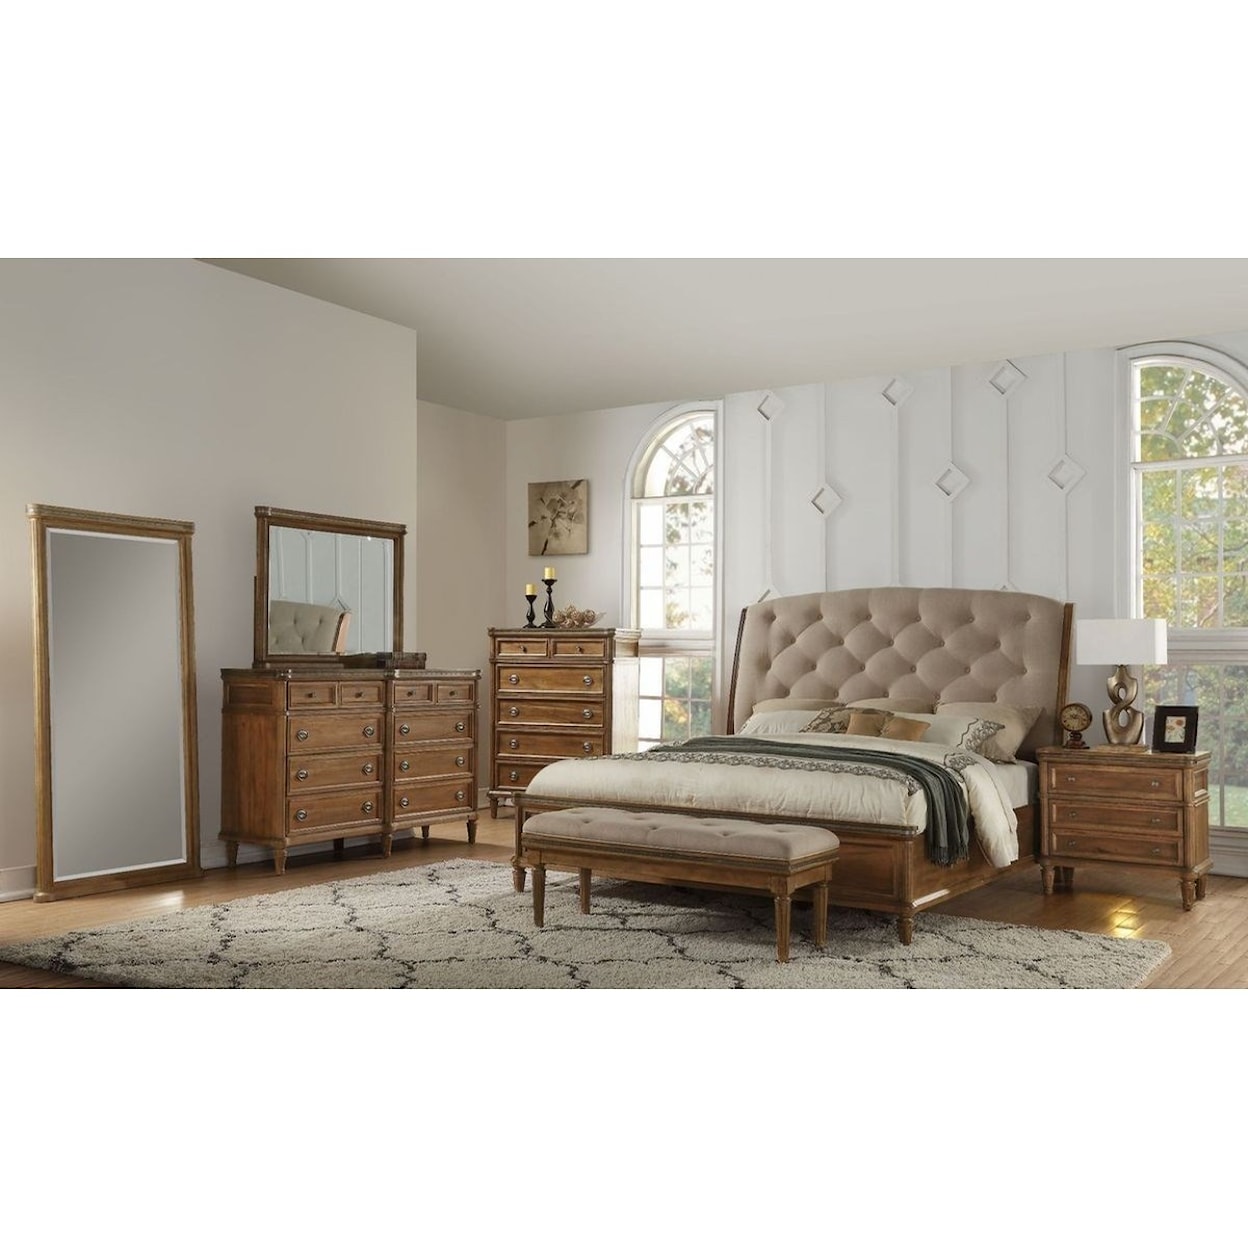 Avalon Furniture Ascot Queen Bedroom Group